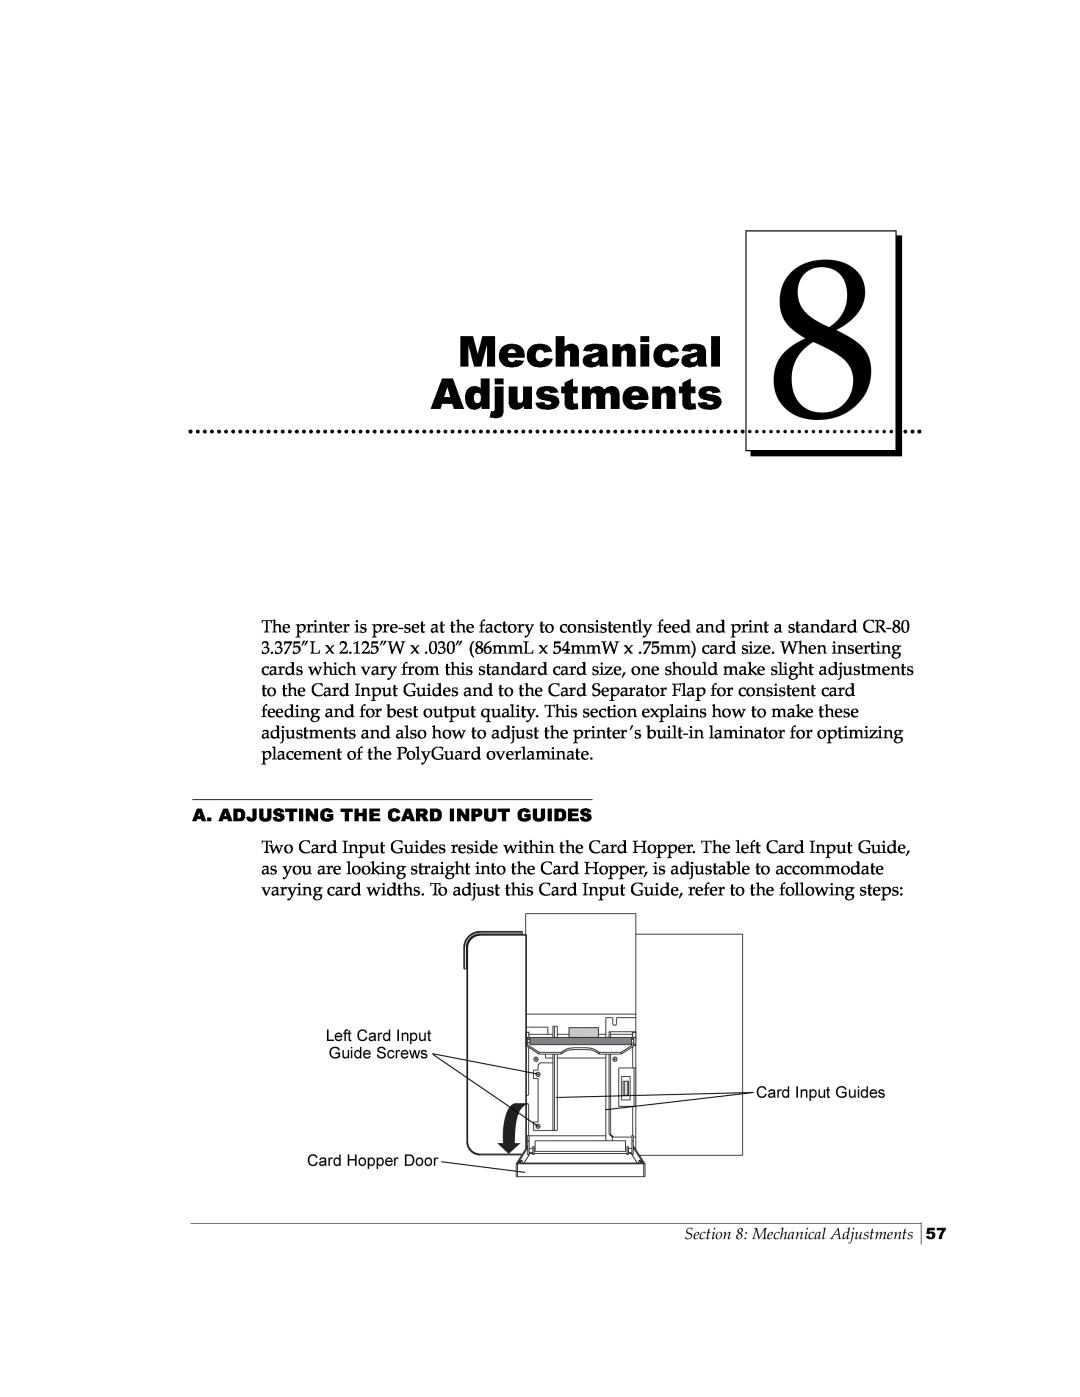 FARGO electronic Pro-L manual Mechanical Adjustments, A. Adjusting The Card Input Guides 